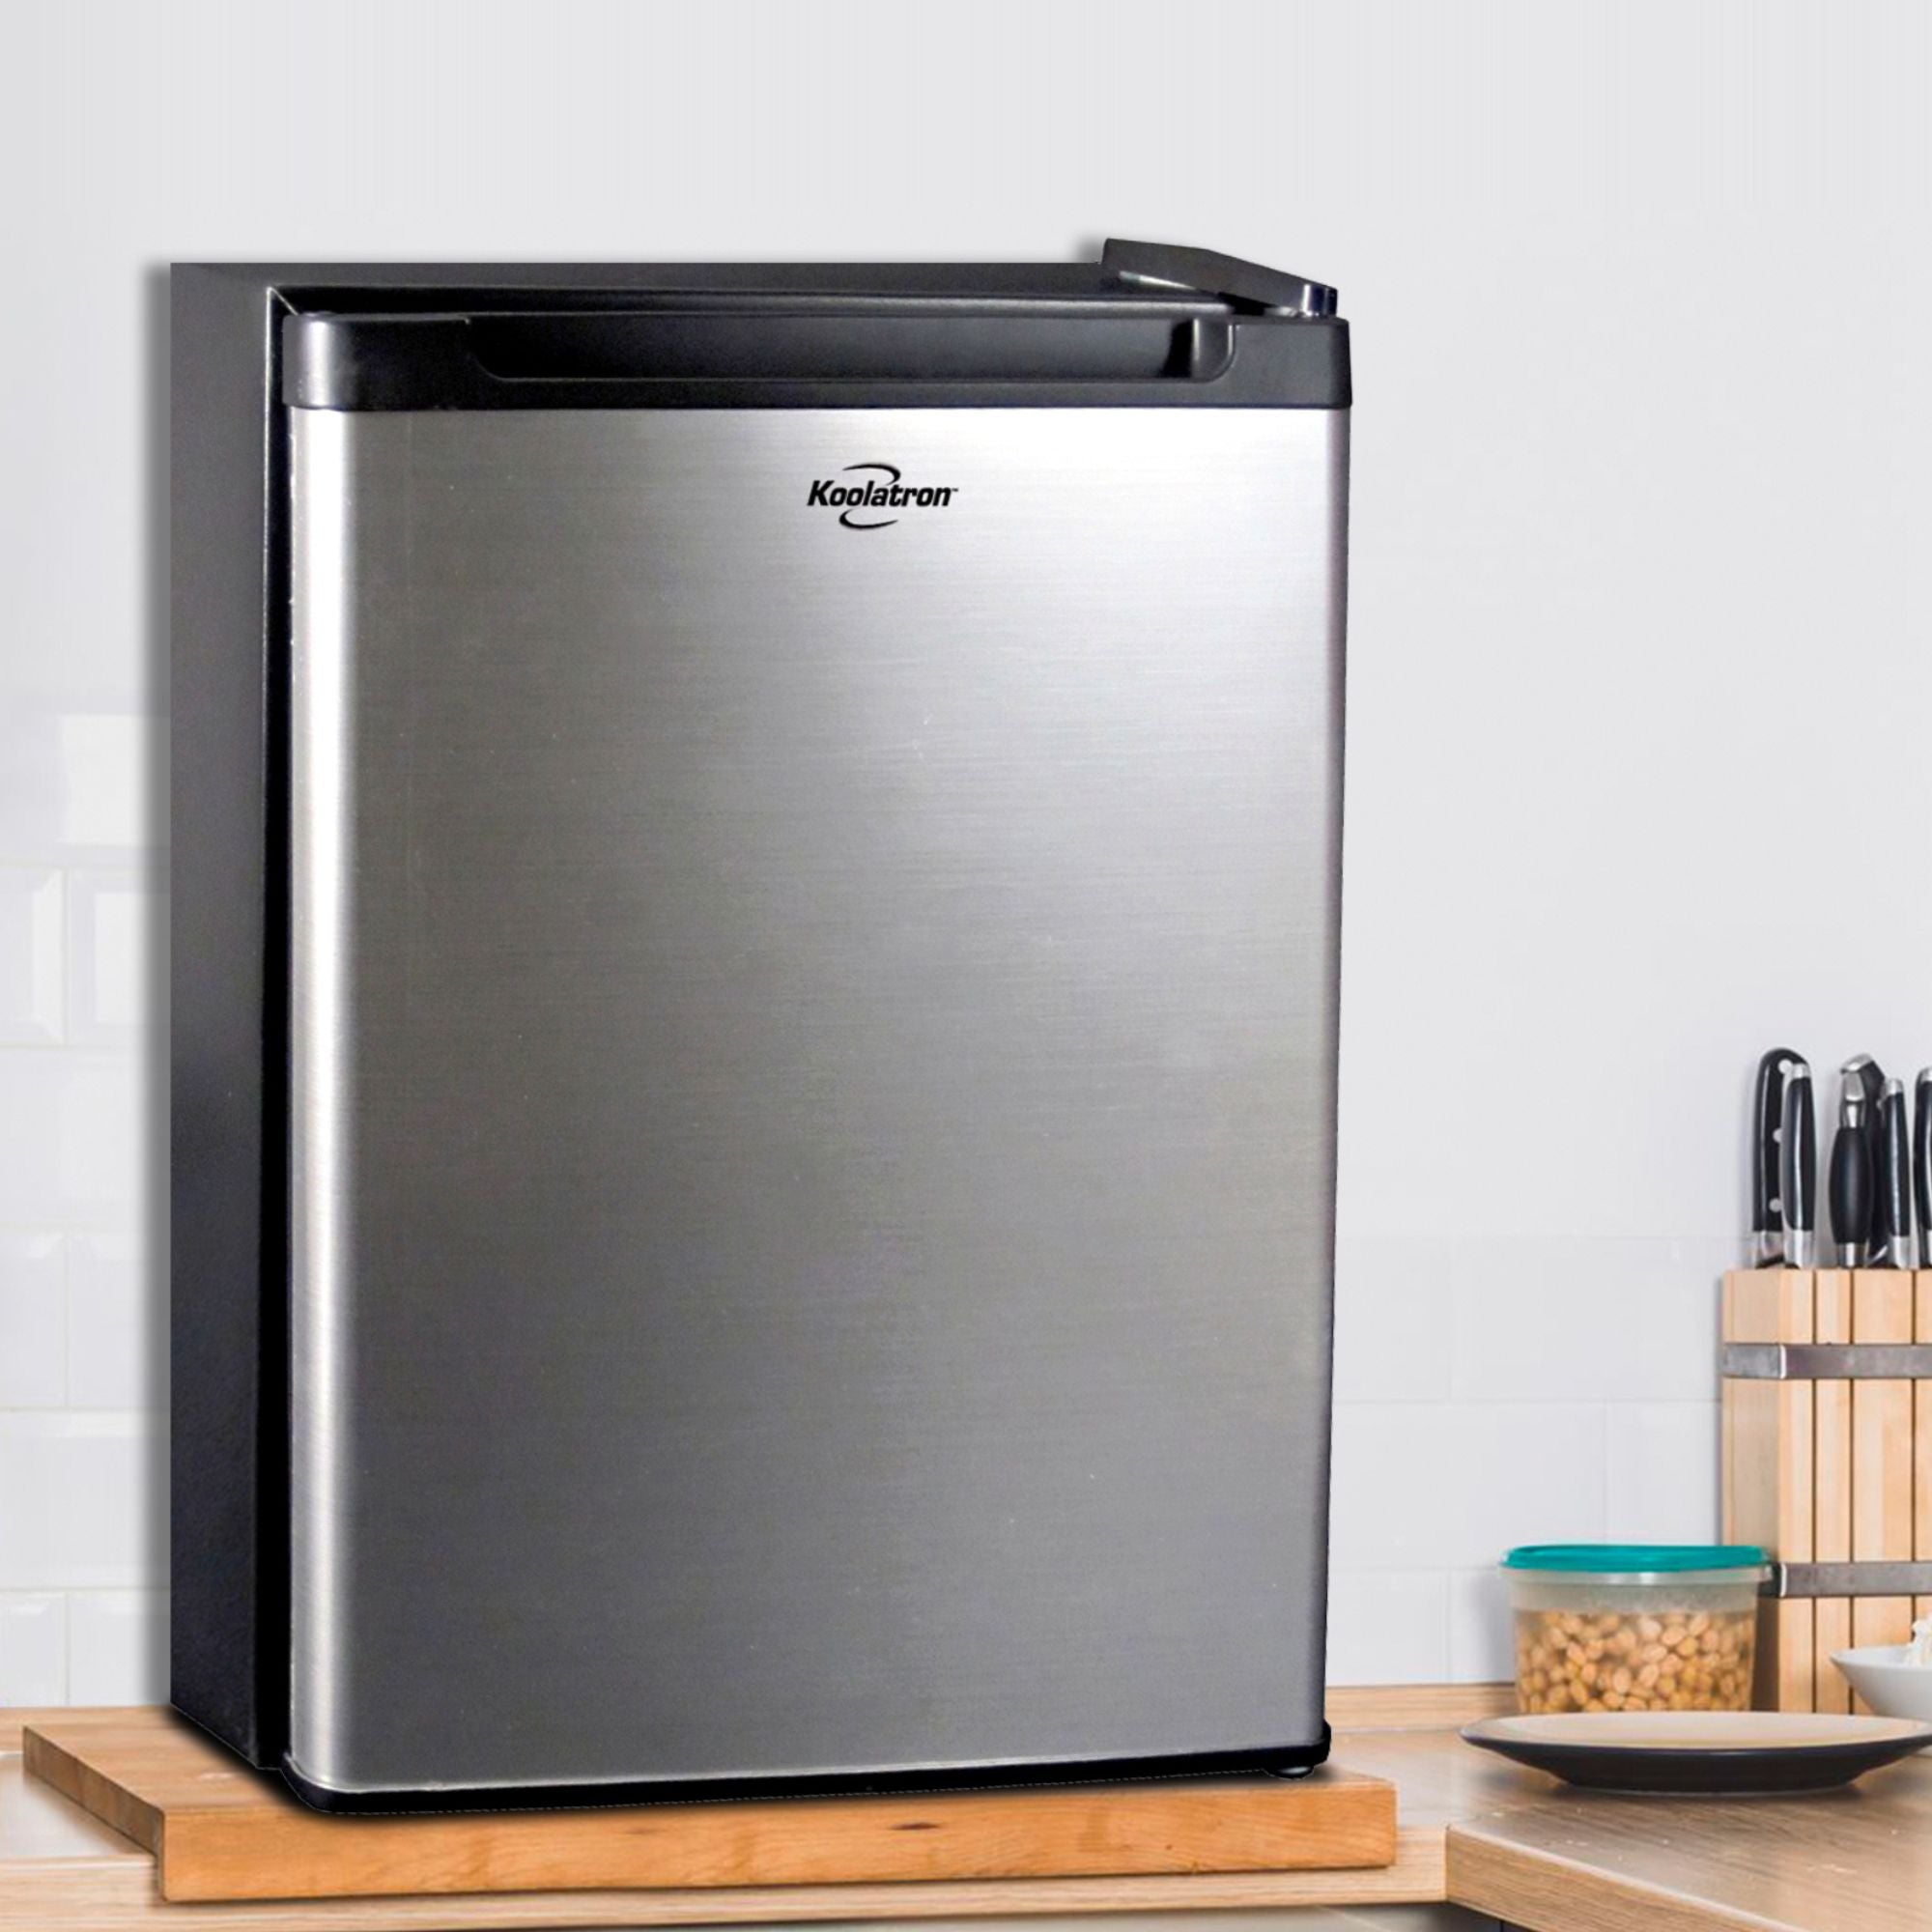 Black and stainless steel compact fridge on a light colored wooden countertop with a white tile wall behind